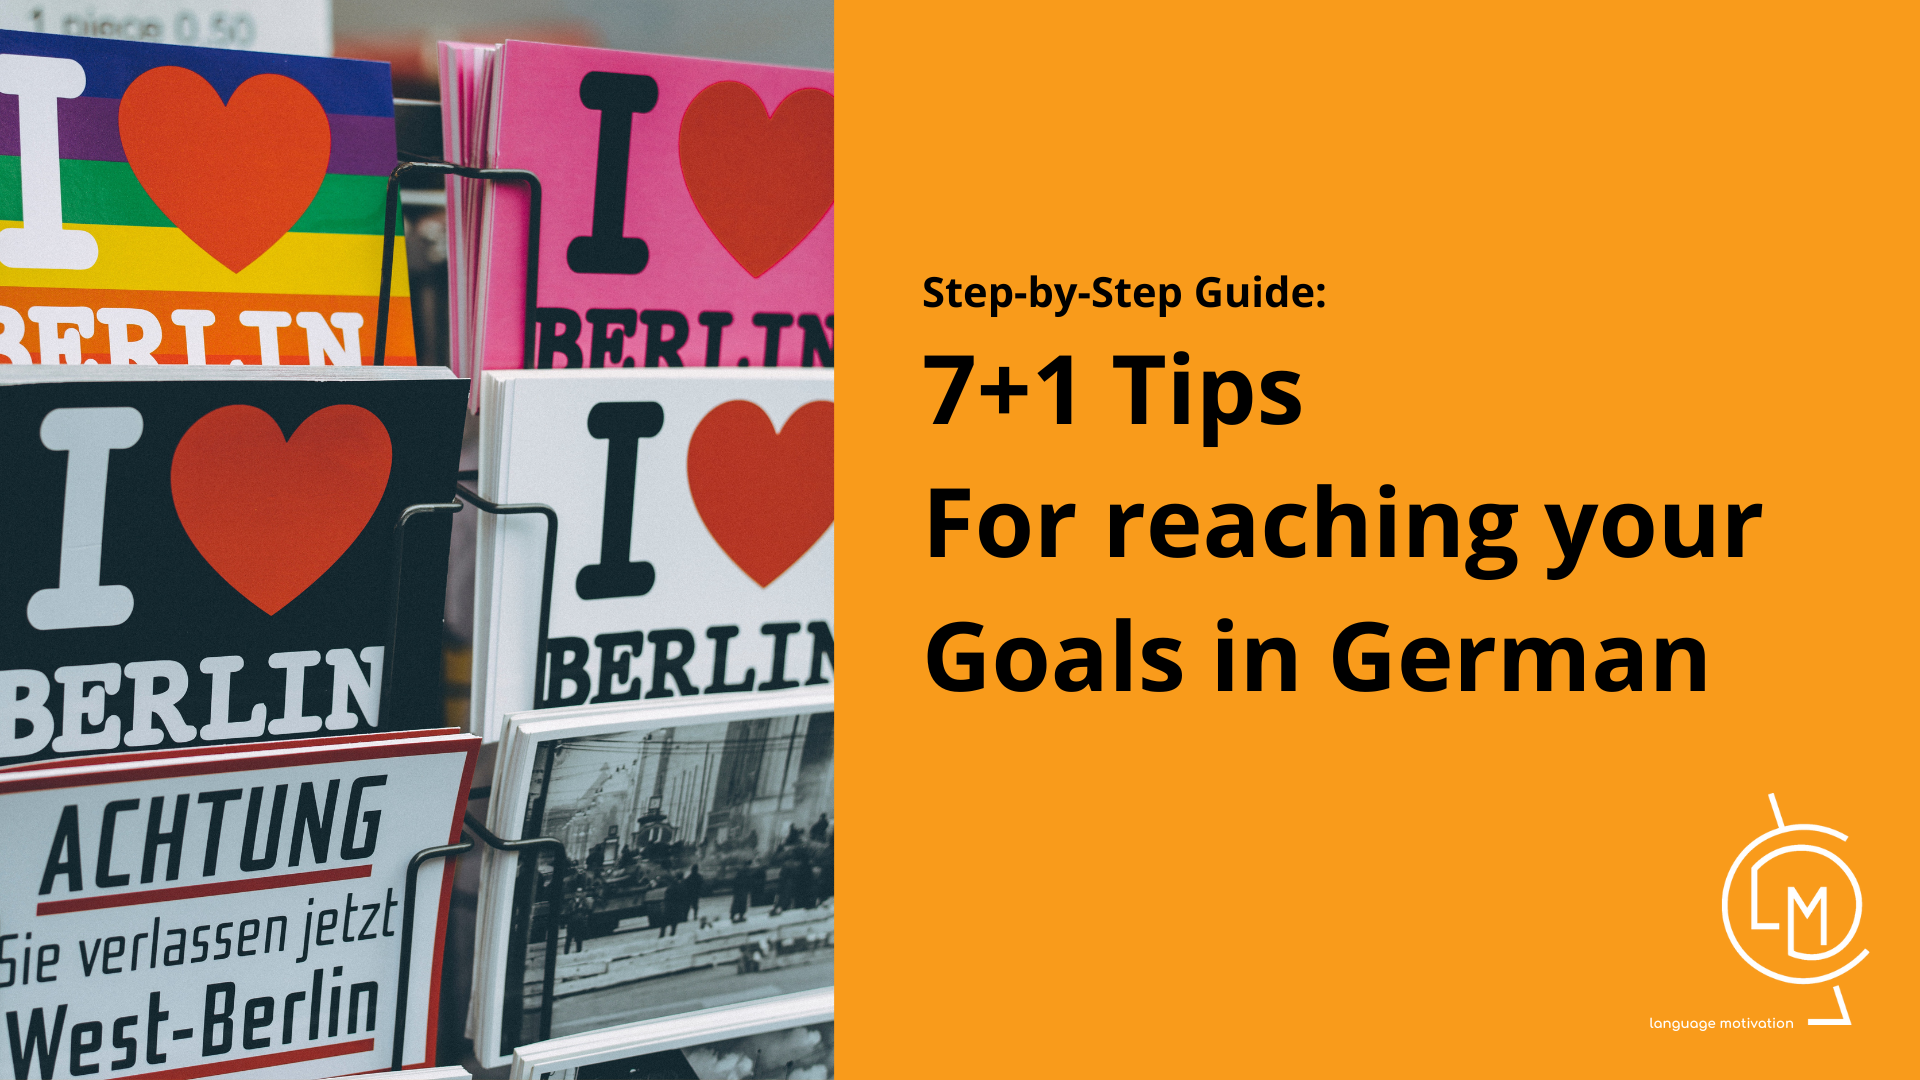 7+1 tips for reaching your goals in German